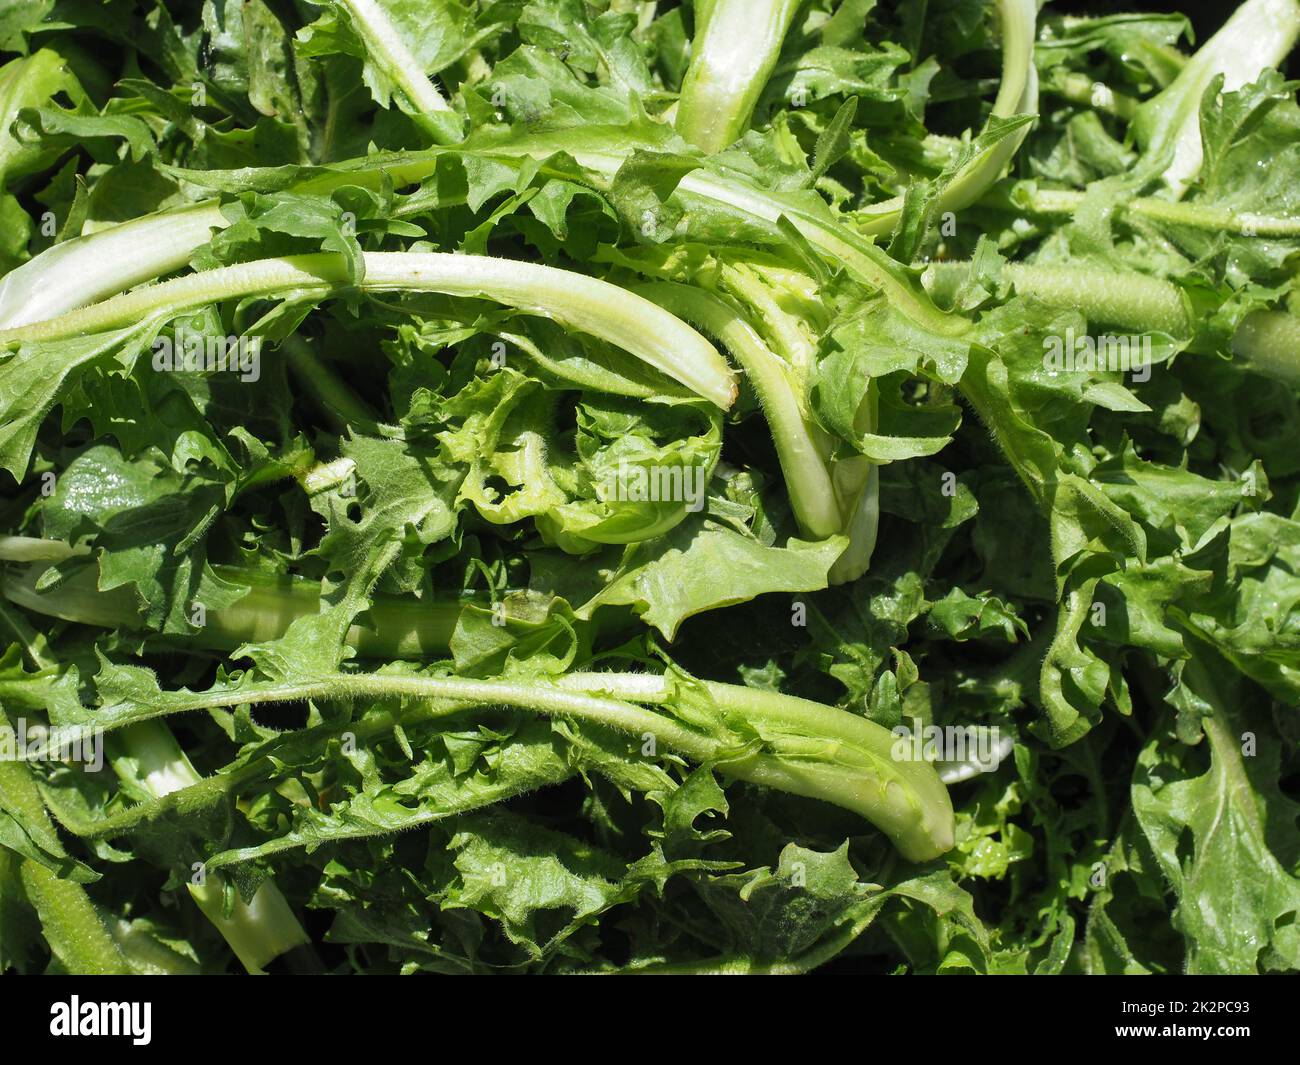 common chicory salad leaves vegetables food Stock Photo